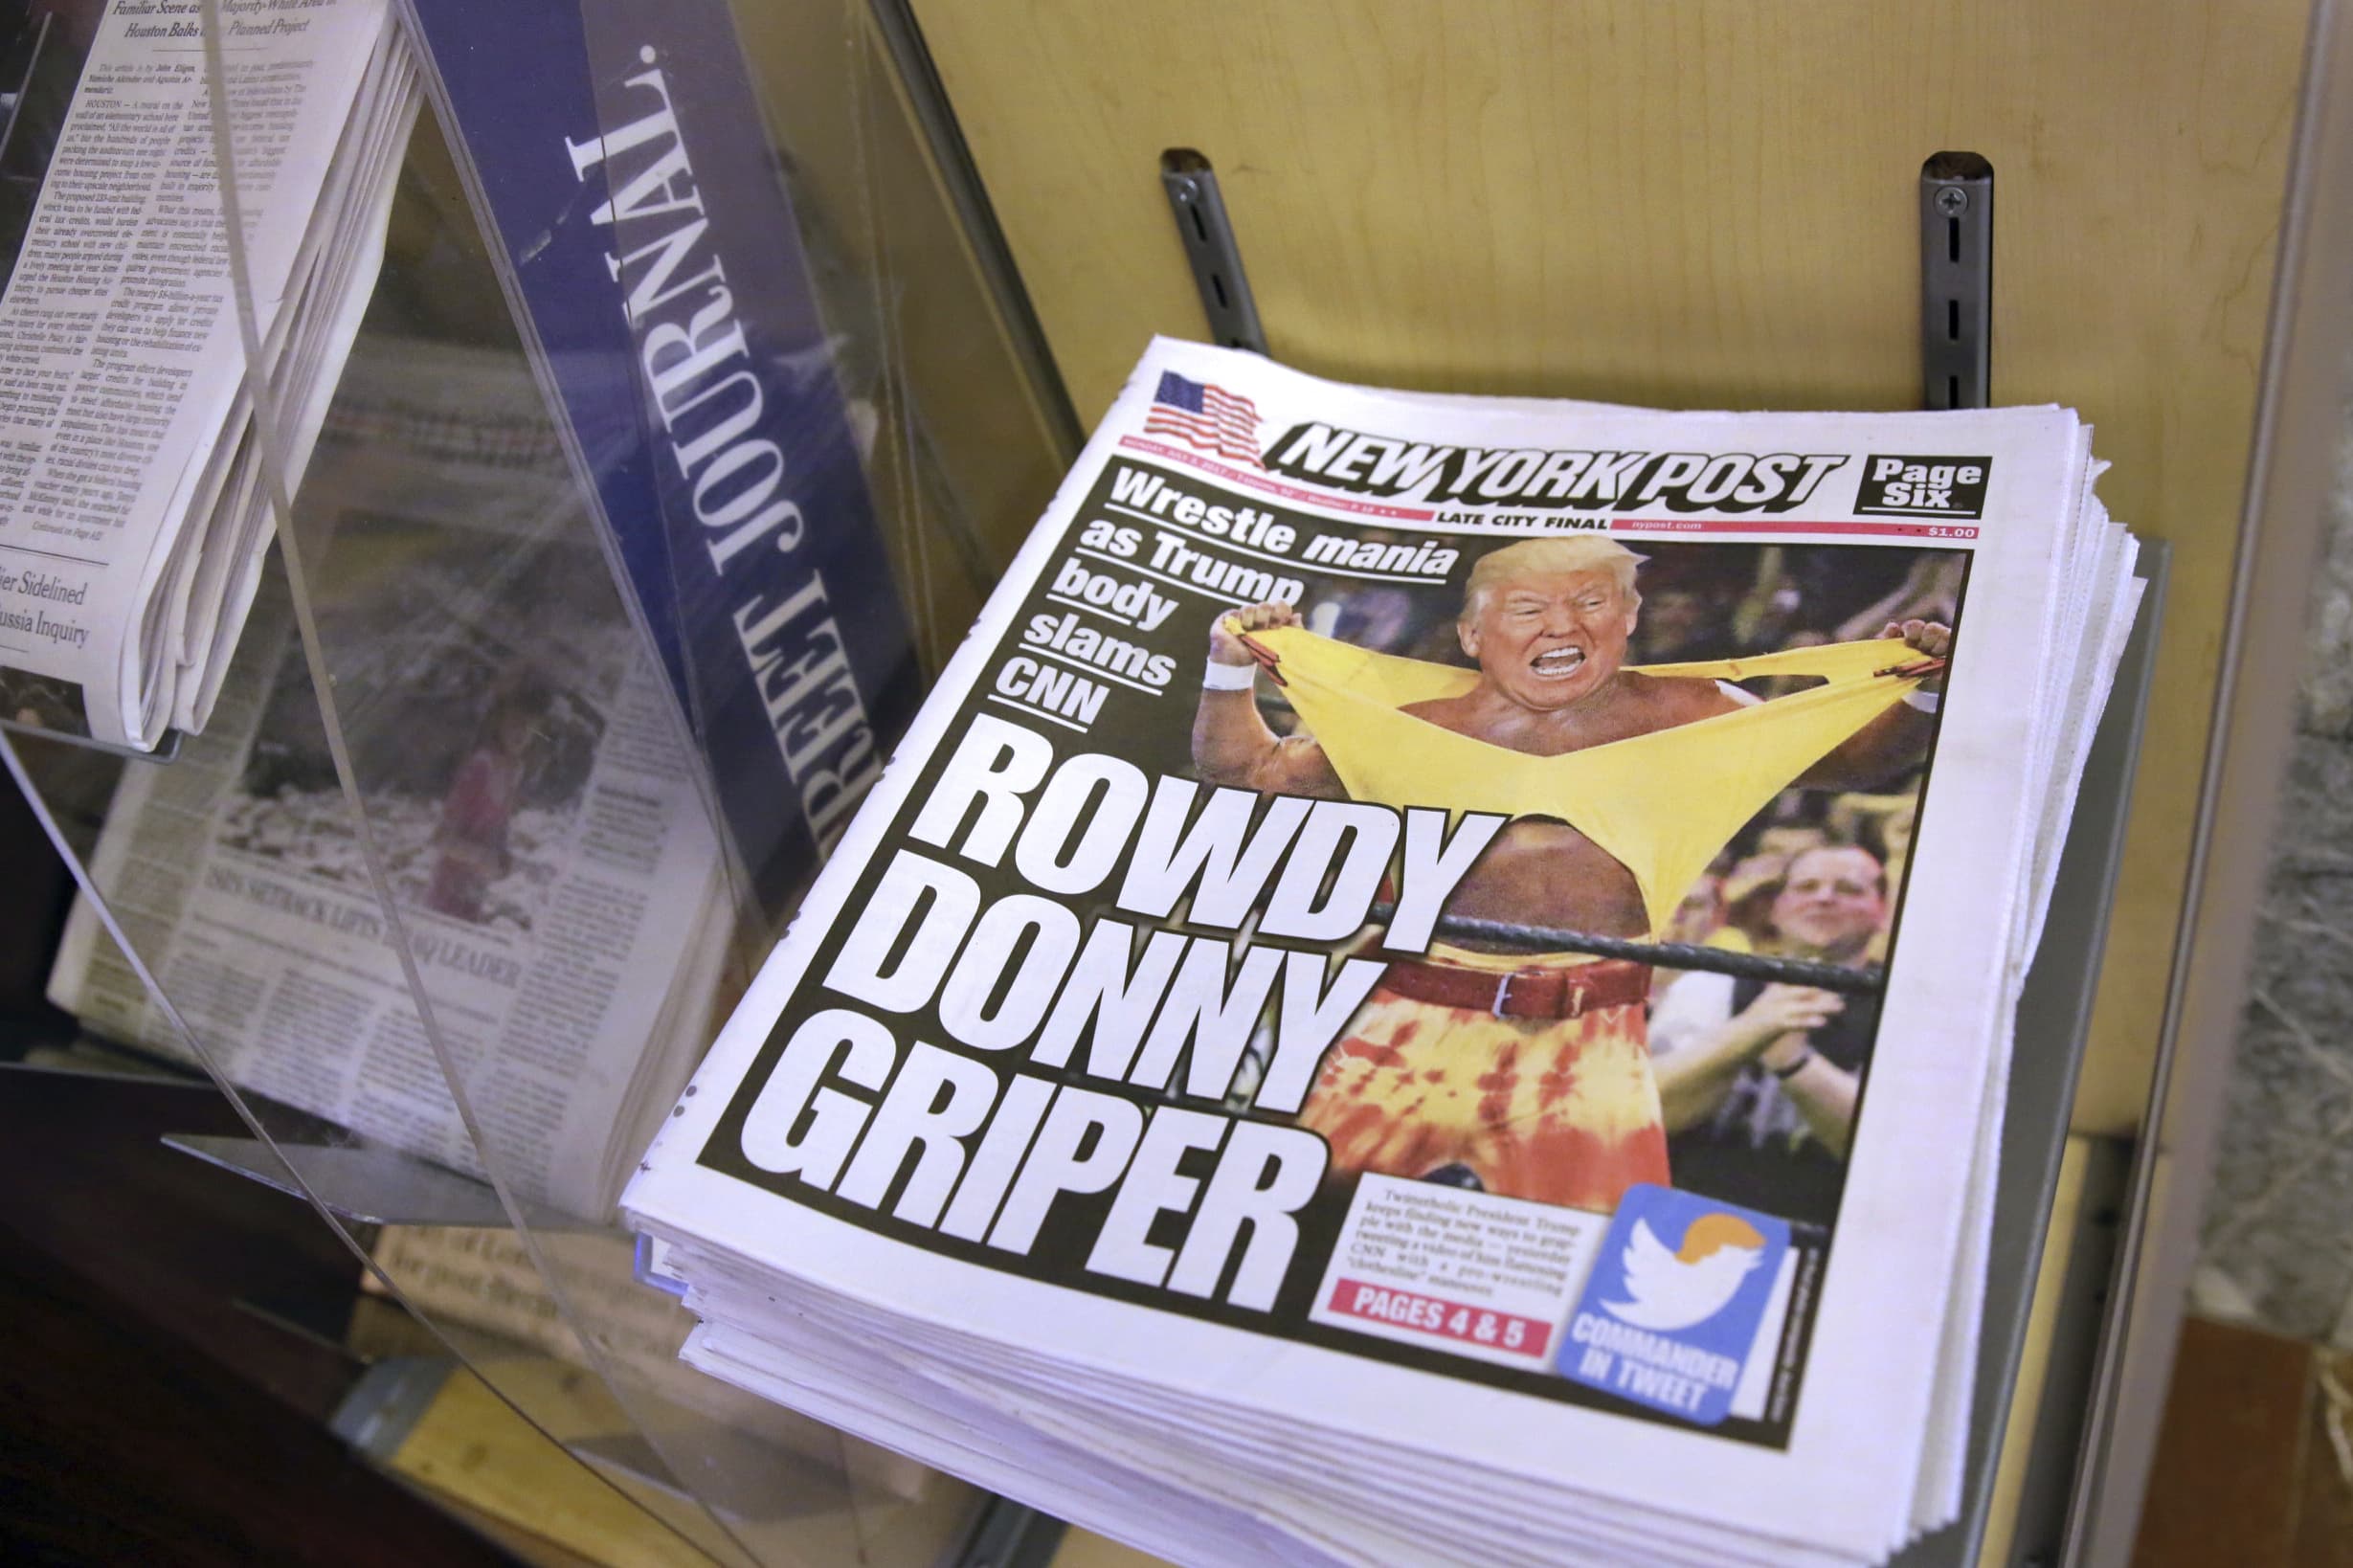 Copies of the "New York Post" with an illustration of President Donald Trump as a professional wrestler on the front page are displayed at a newsstand in New York City, 3 July 2017, AP Photo/Richard Drew